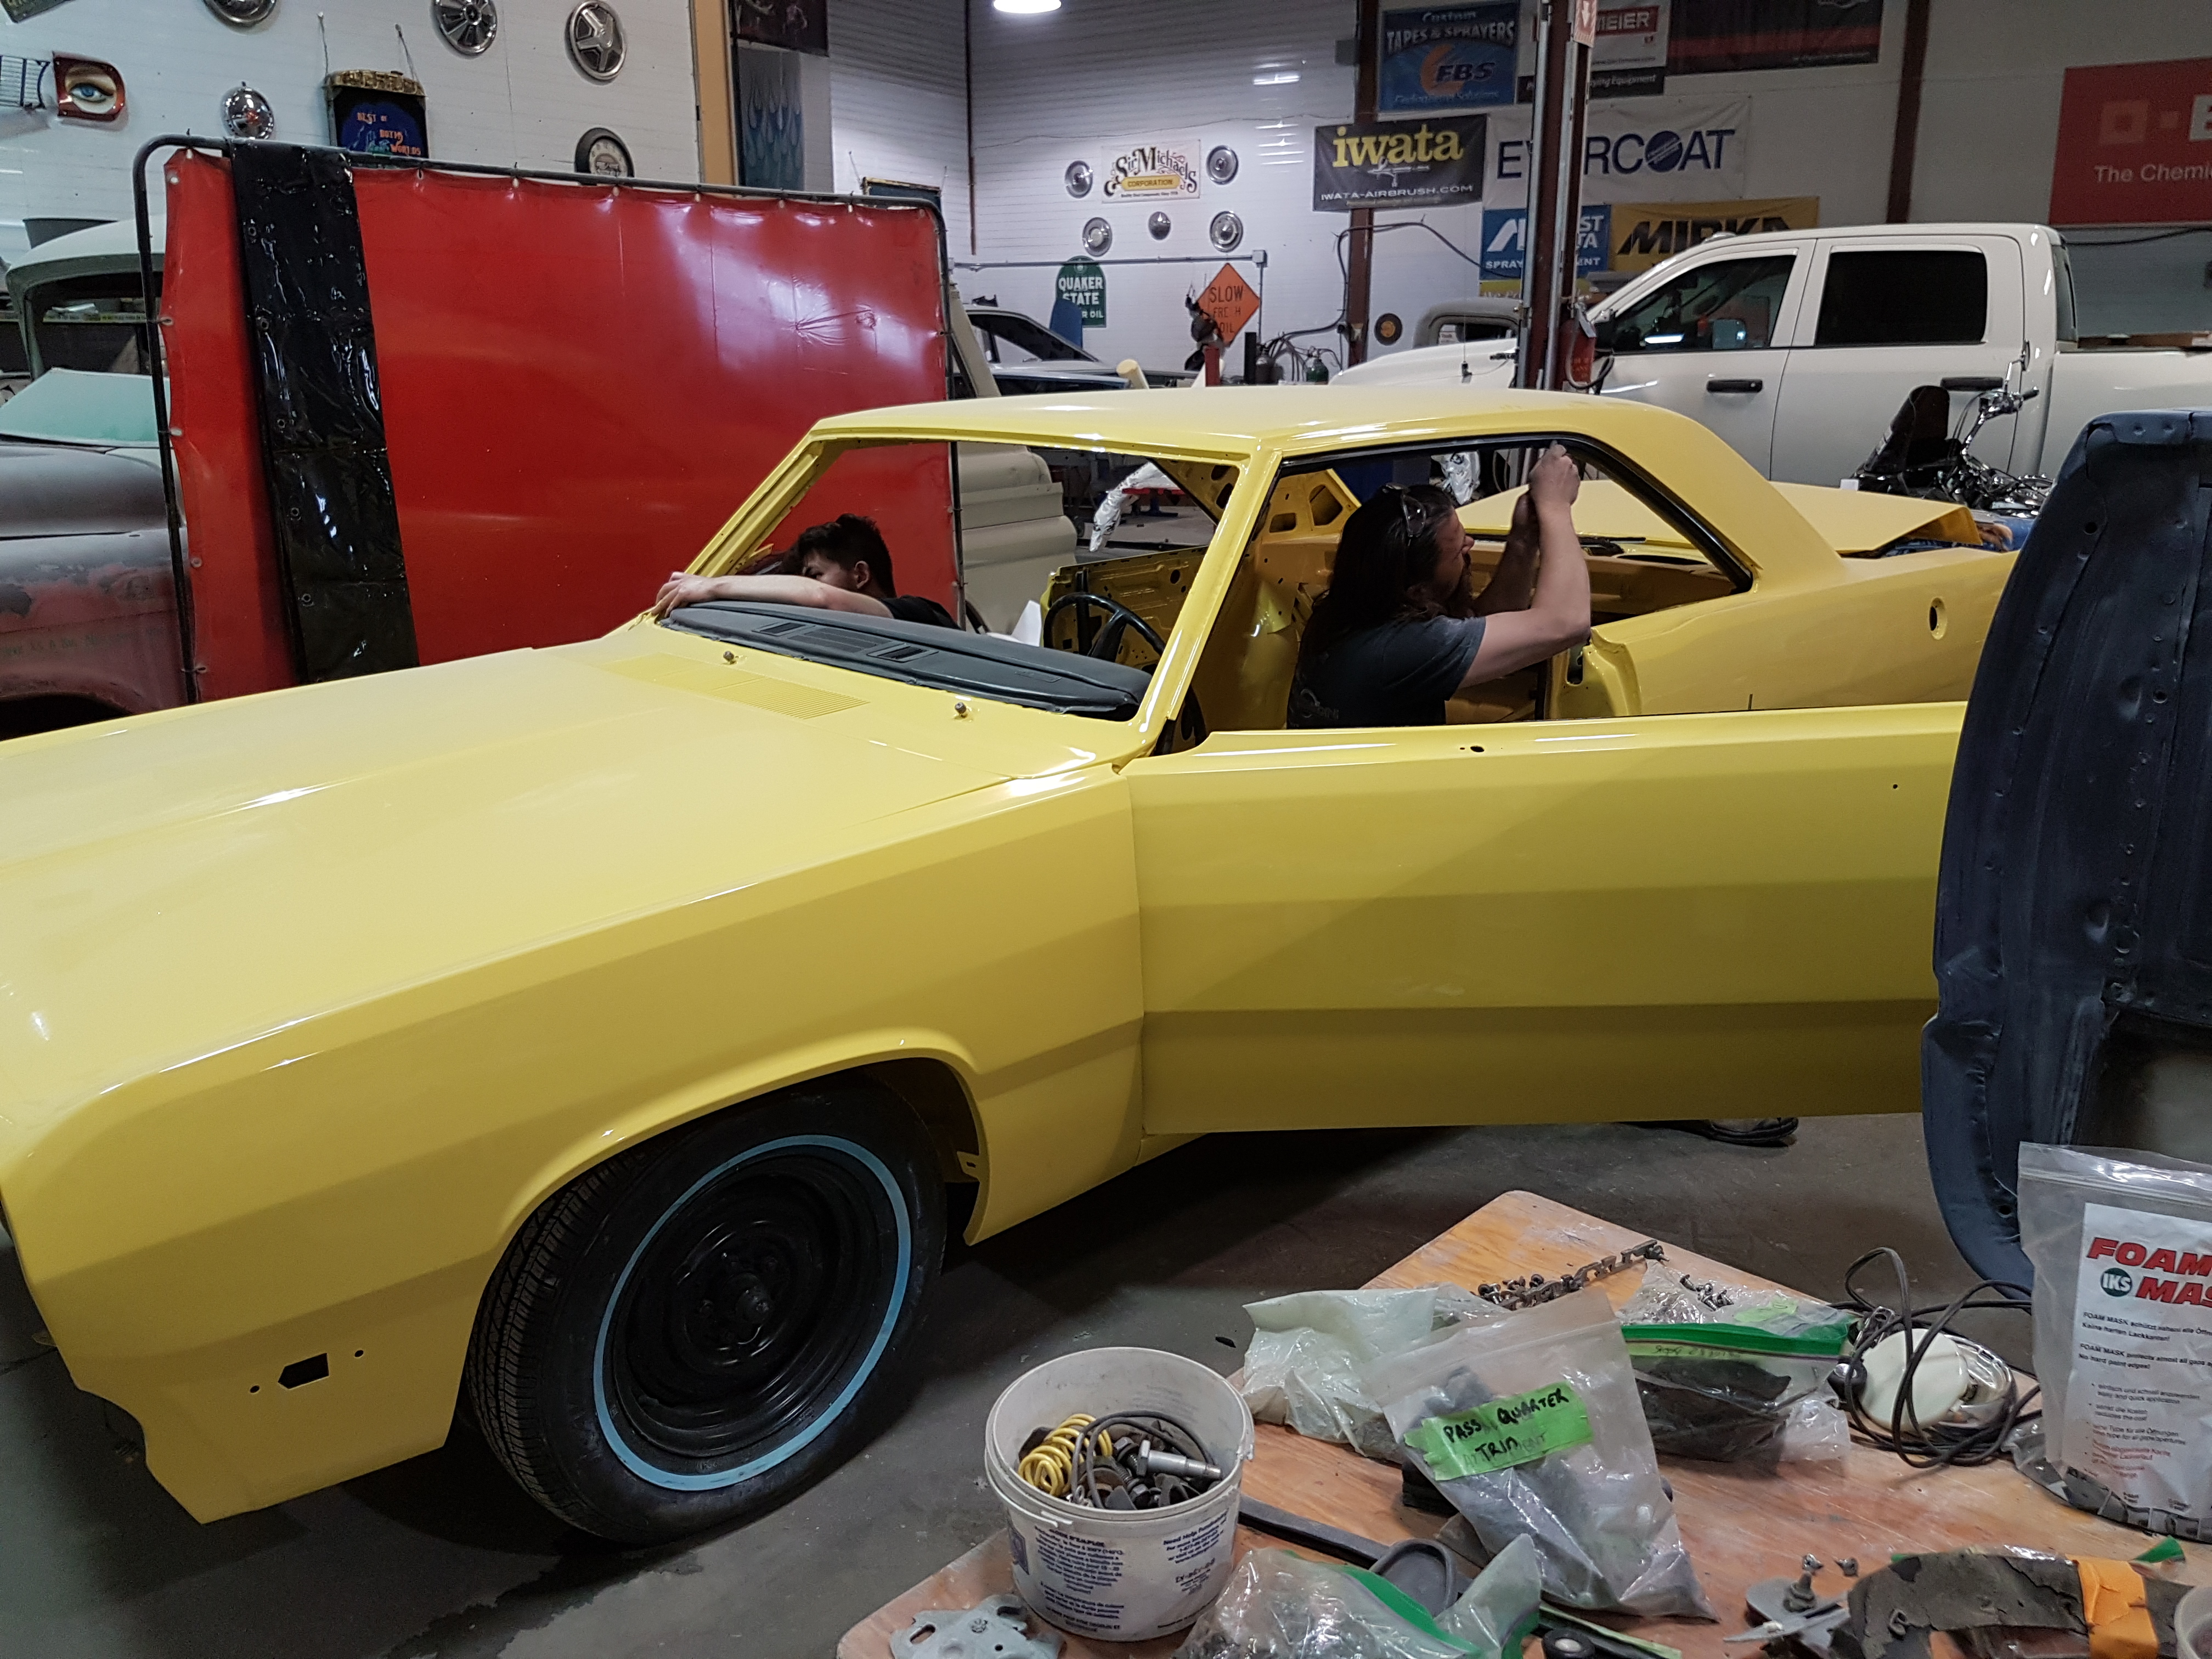 A technician replaces window trim in a yellow 1972 Plymouth Scamp